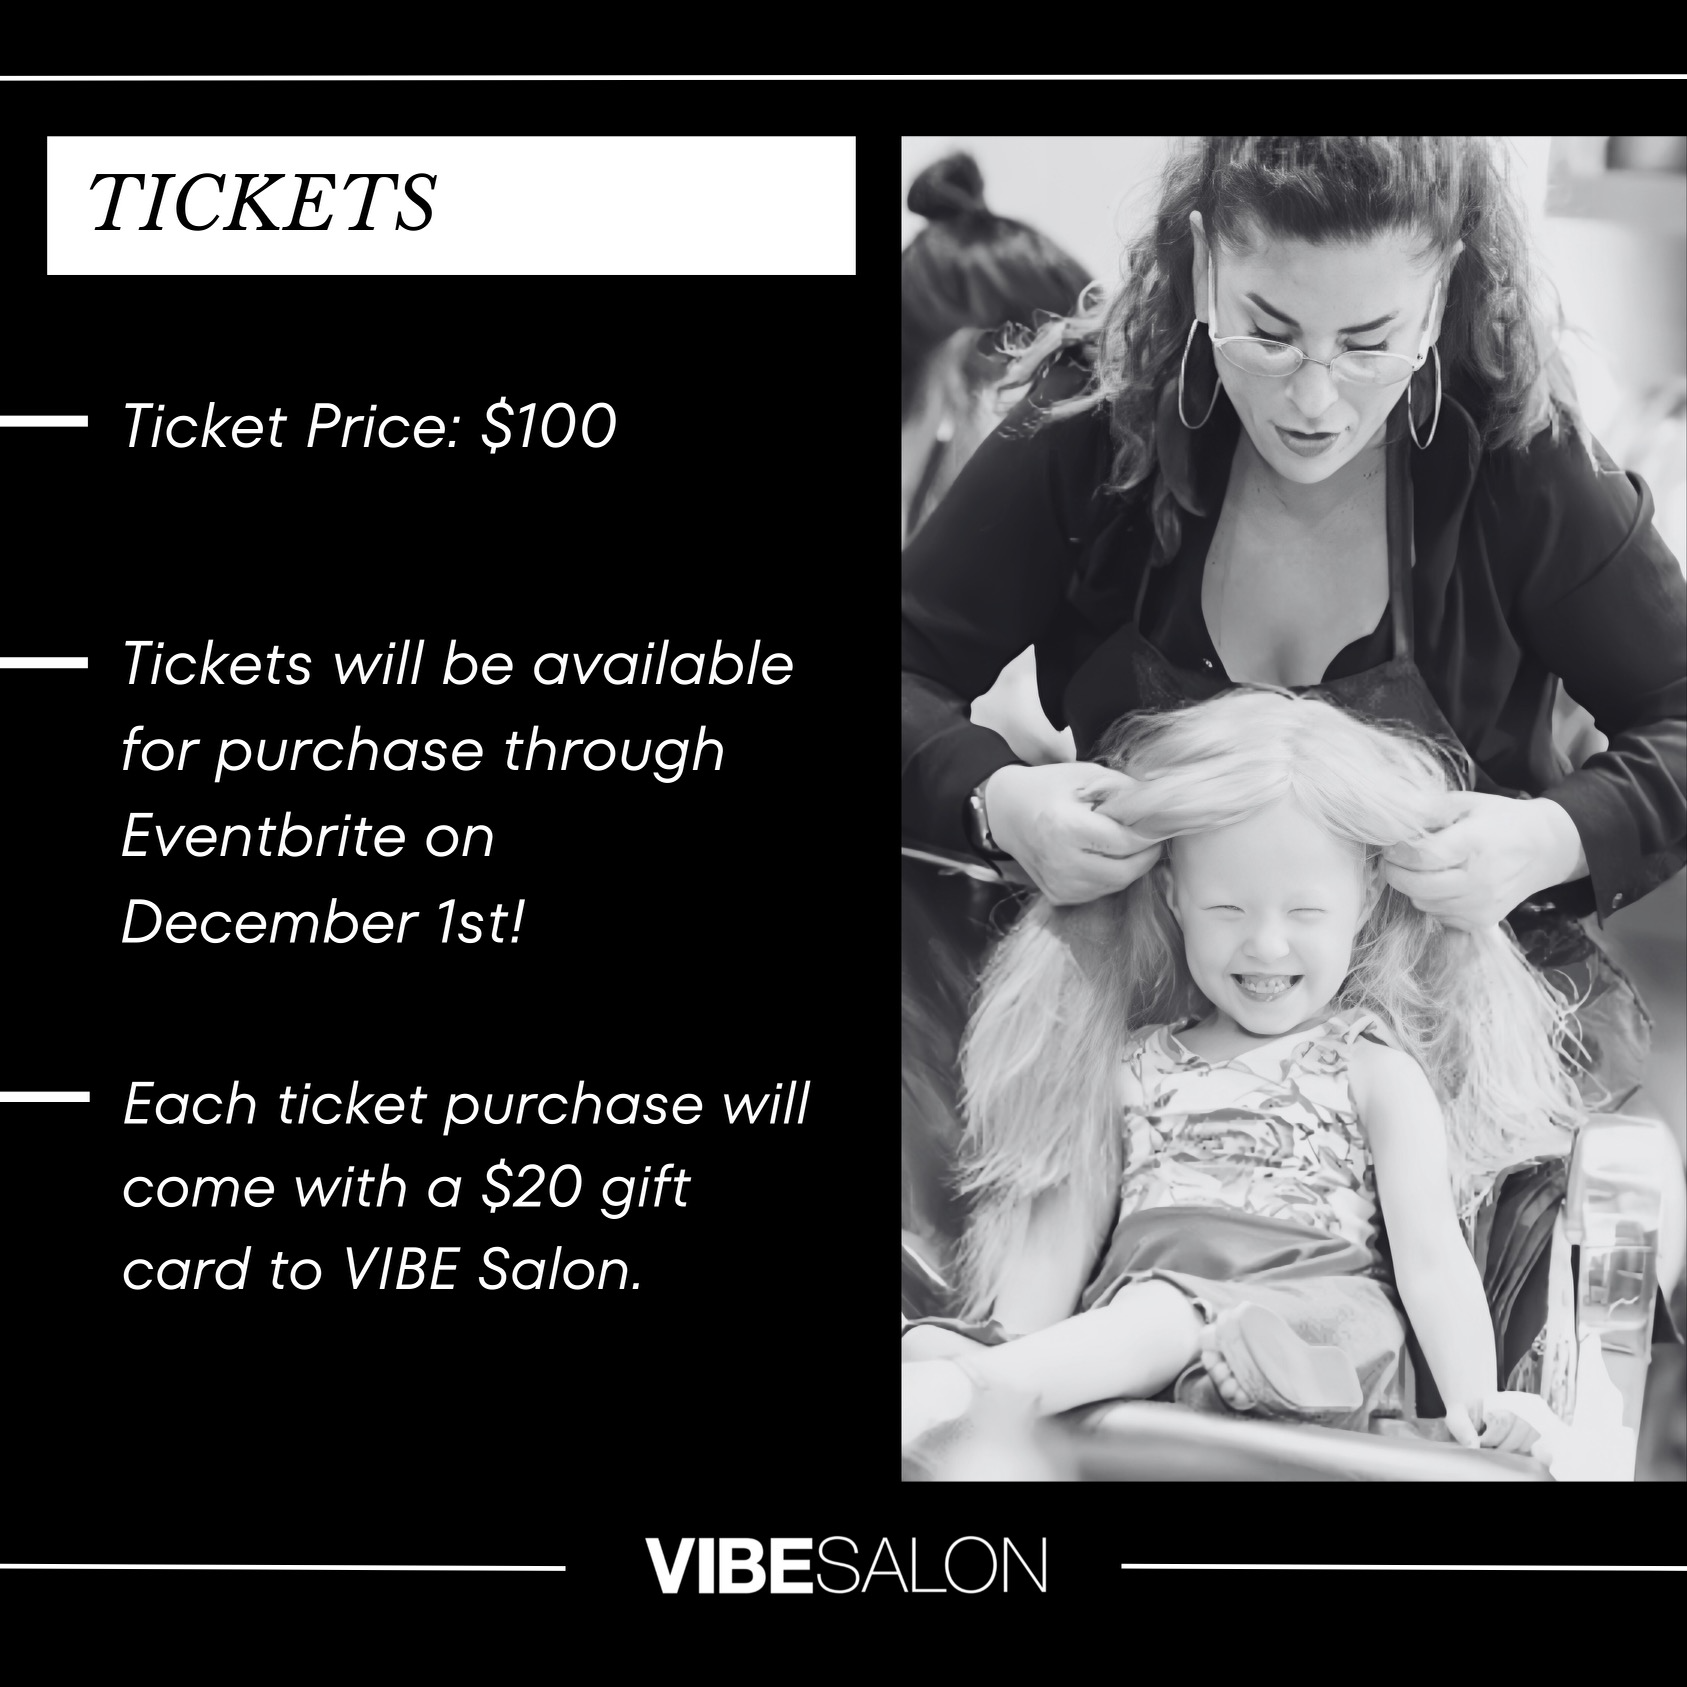 Click to read article: February 24, VIBE Salon First Annual Winter Event'